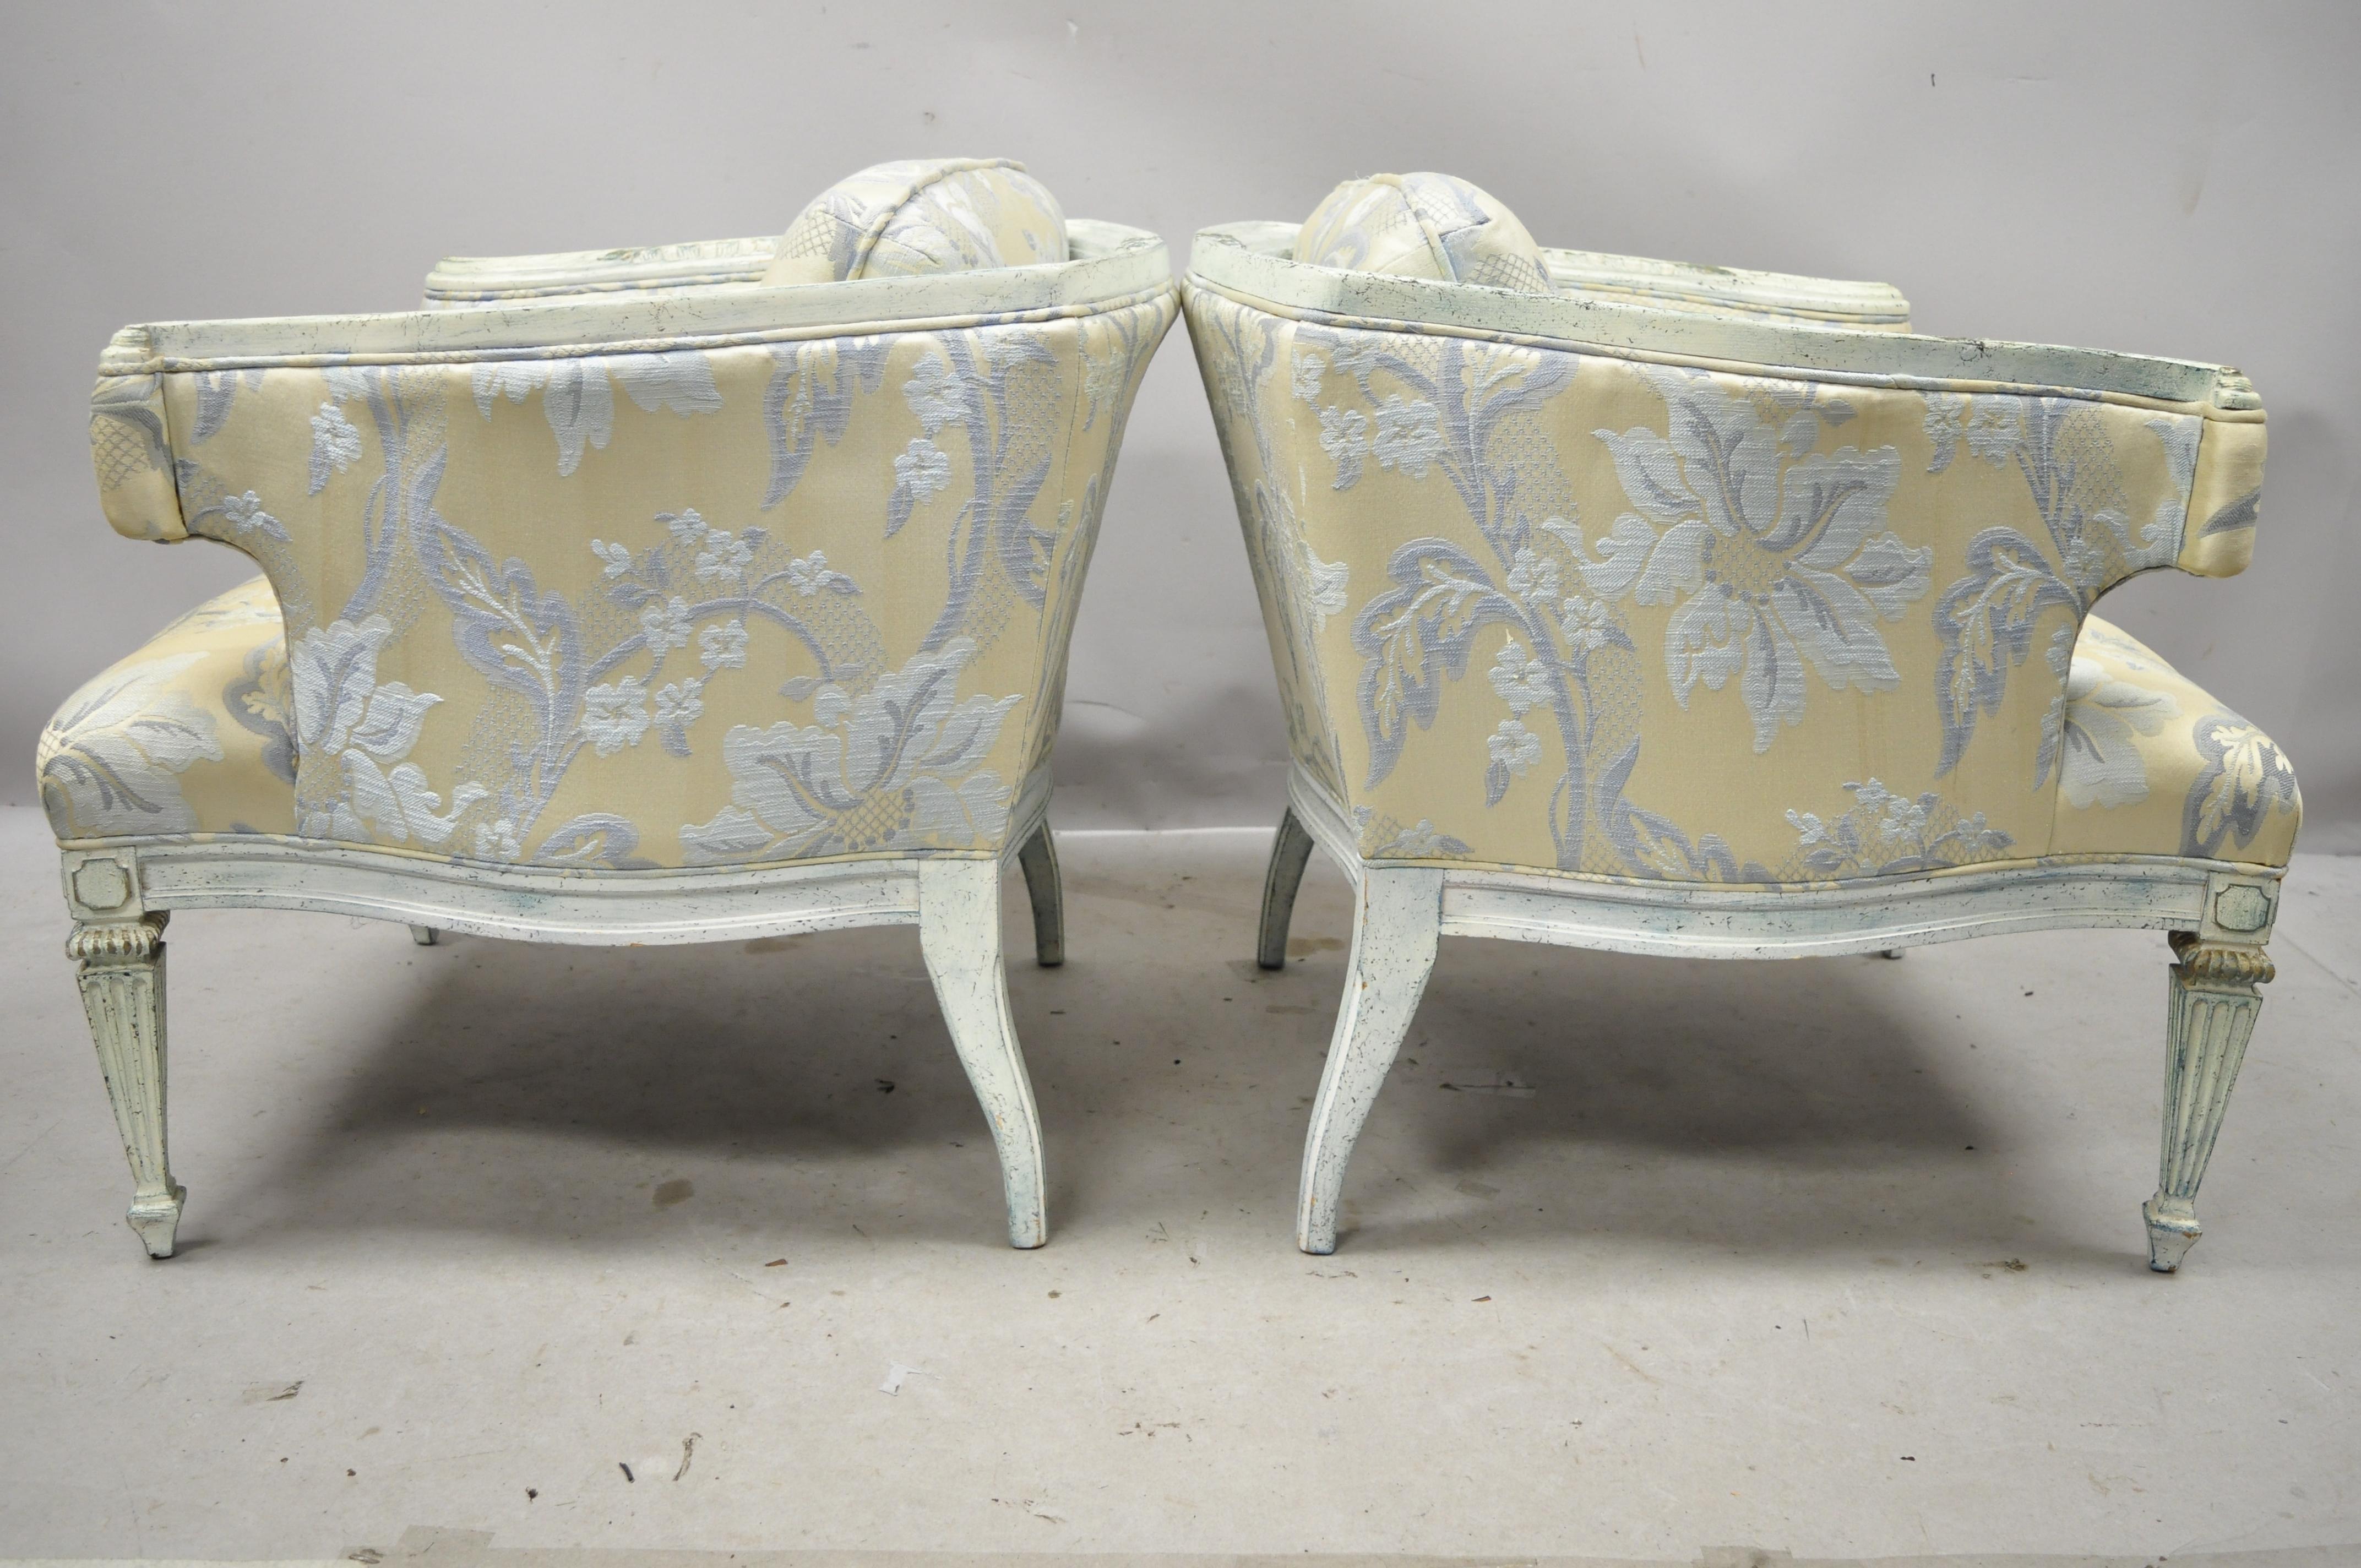 Vintage French Provincial Louis XVI Blue and Cream Painted Club Chairs, a Pair For Sale 6